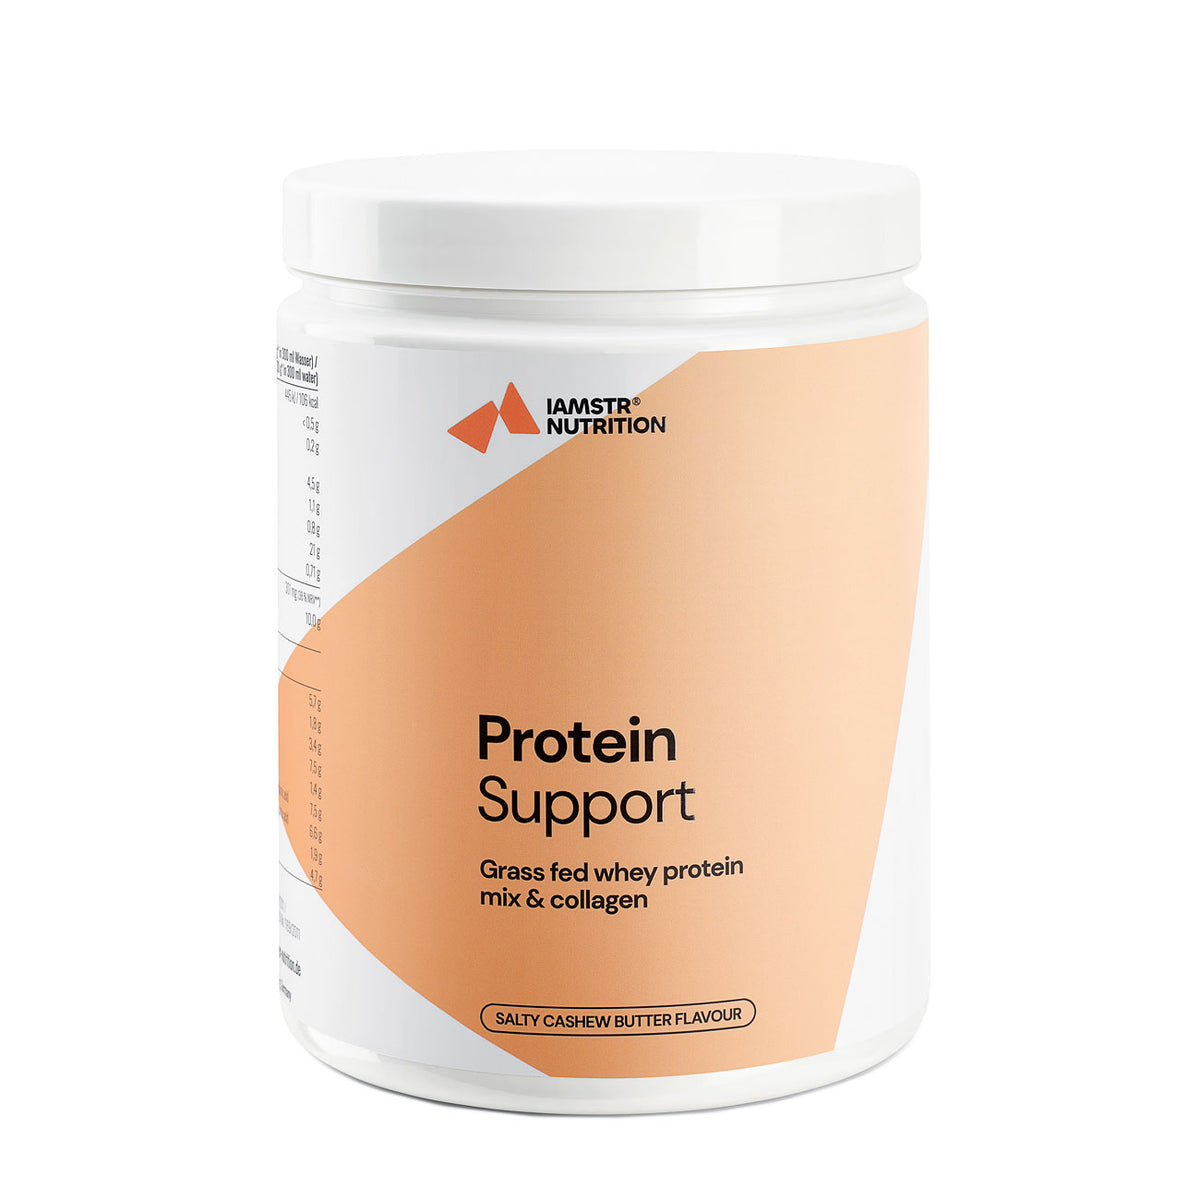 Protein Support Salty Cashew Butter